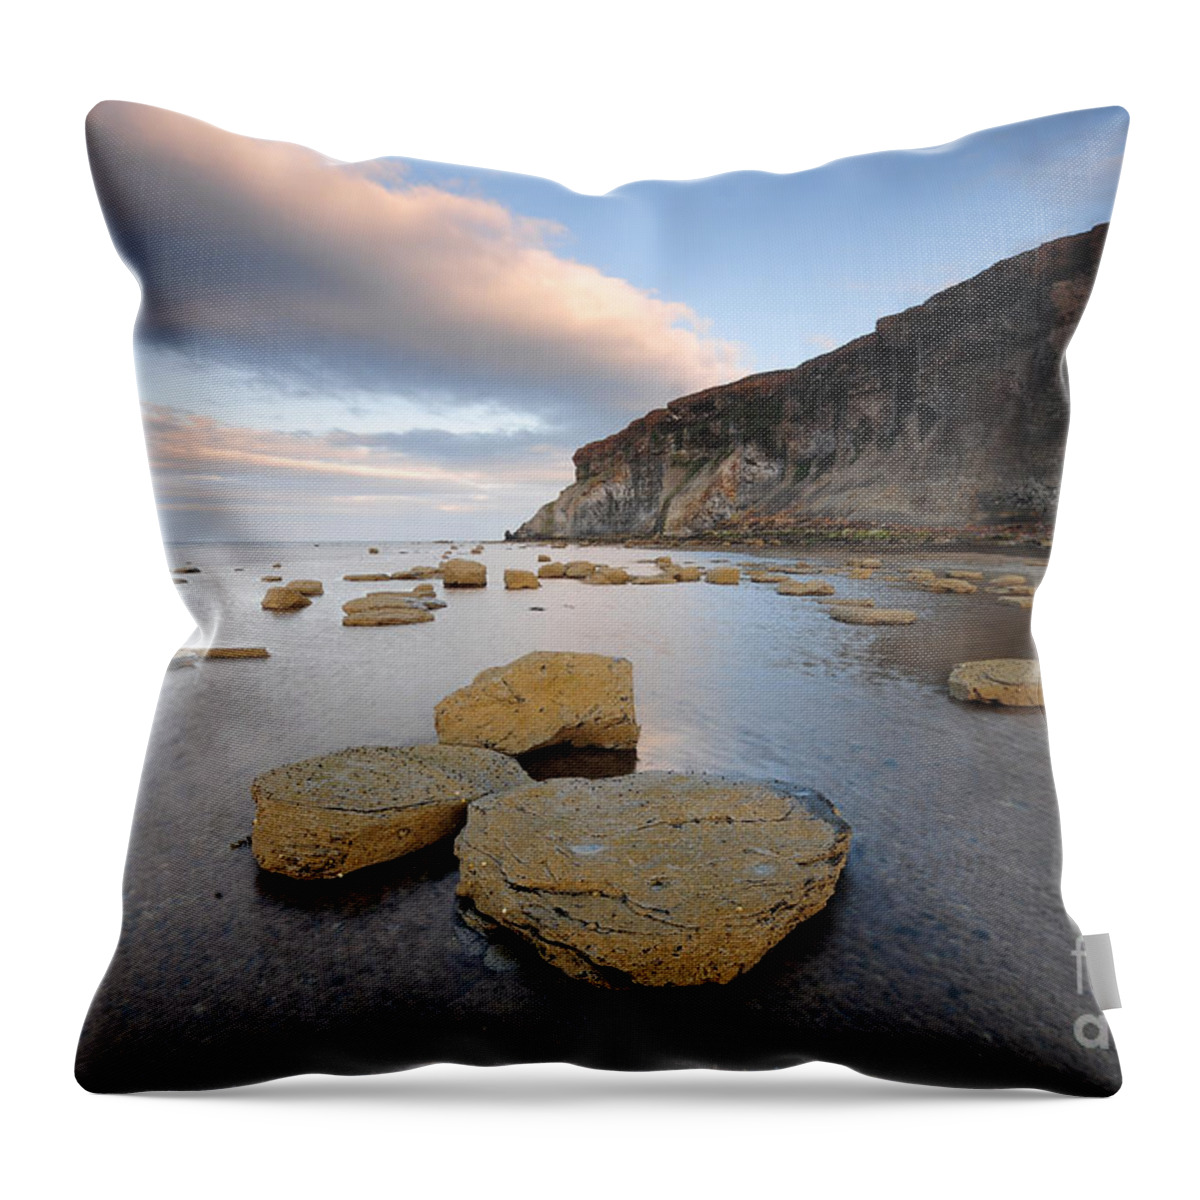 Saltwick Bay Throw Pillow featuring the photograph Saltwick Bay #10 by Smart Aviation